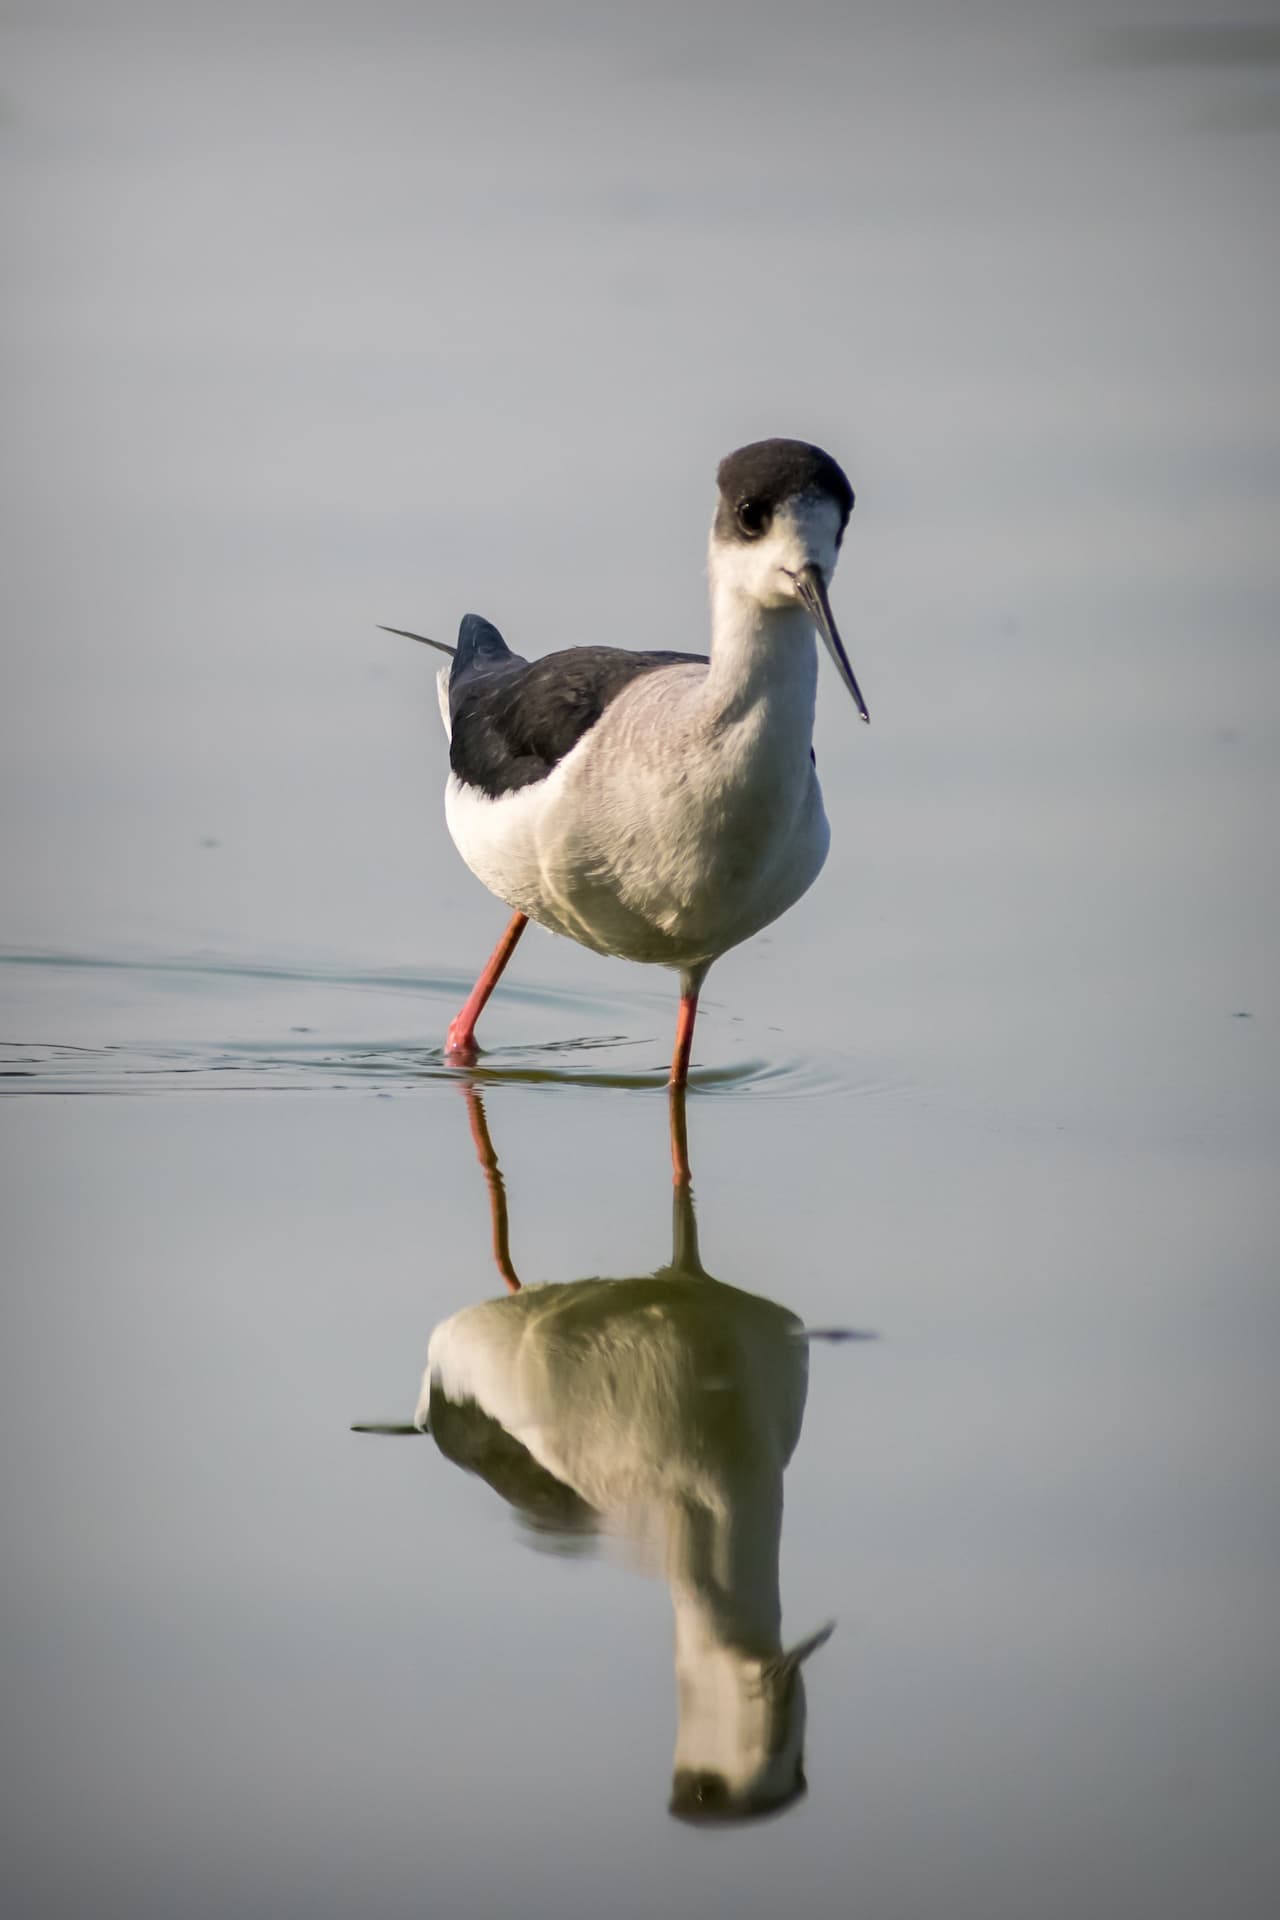 The Black-Winged Stilt Hunting In The Water For Food